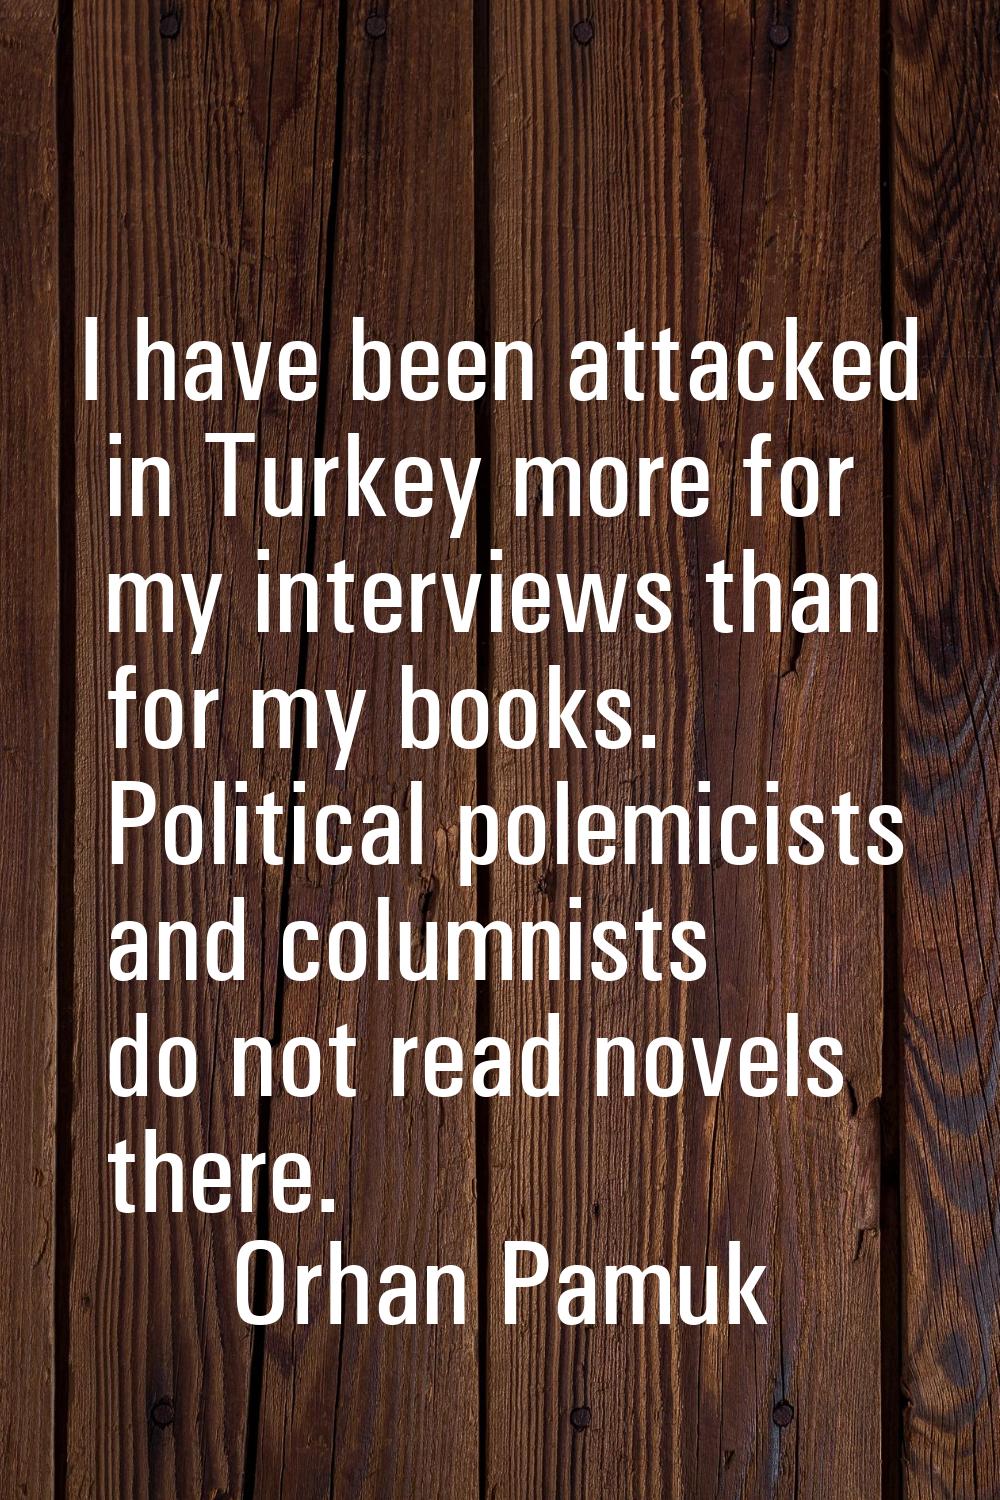 I have been attacked in Turkey more for my interviews than for my books. Political polemicists and 